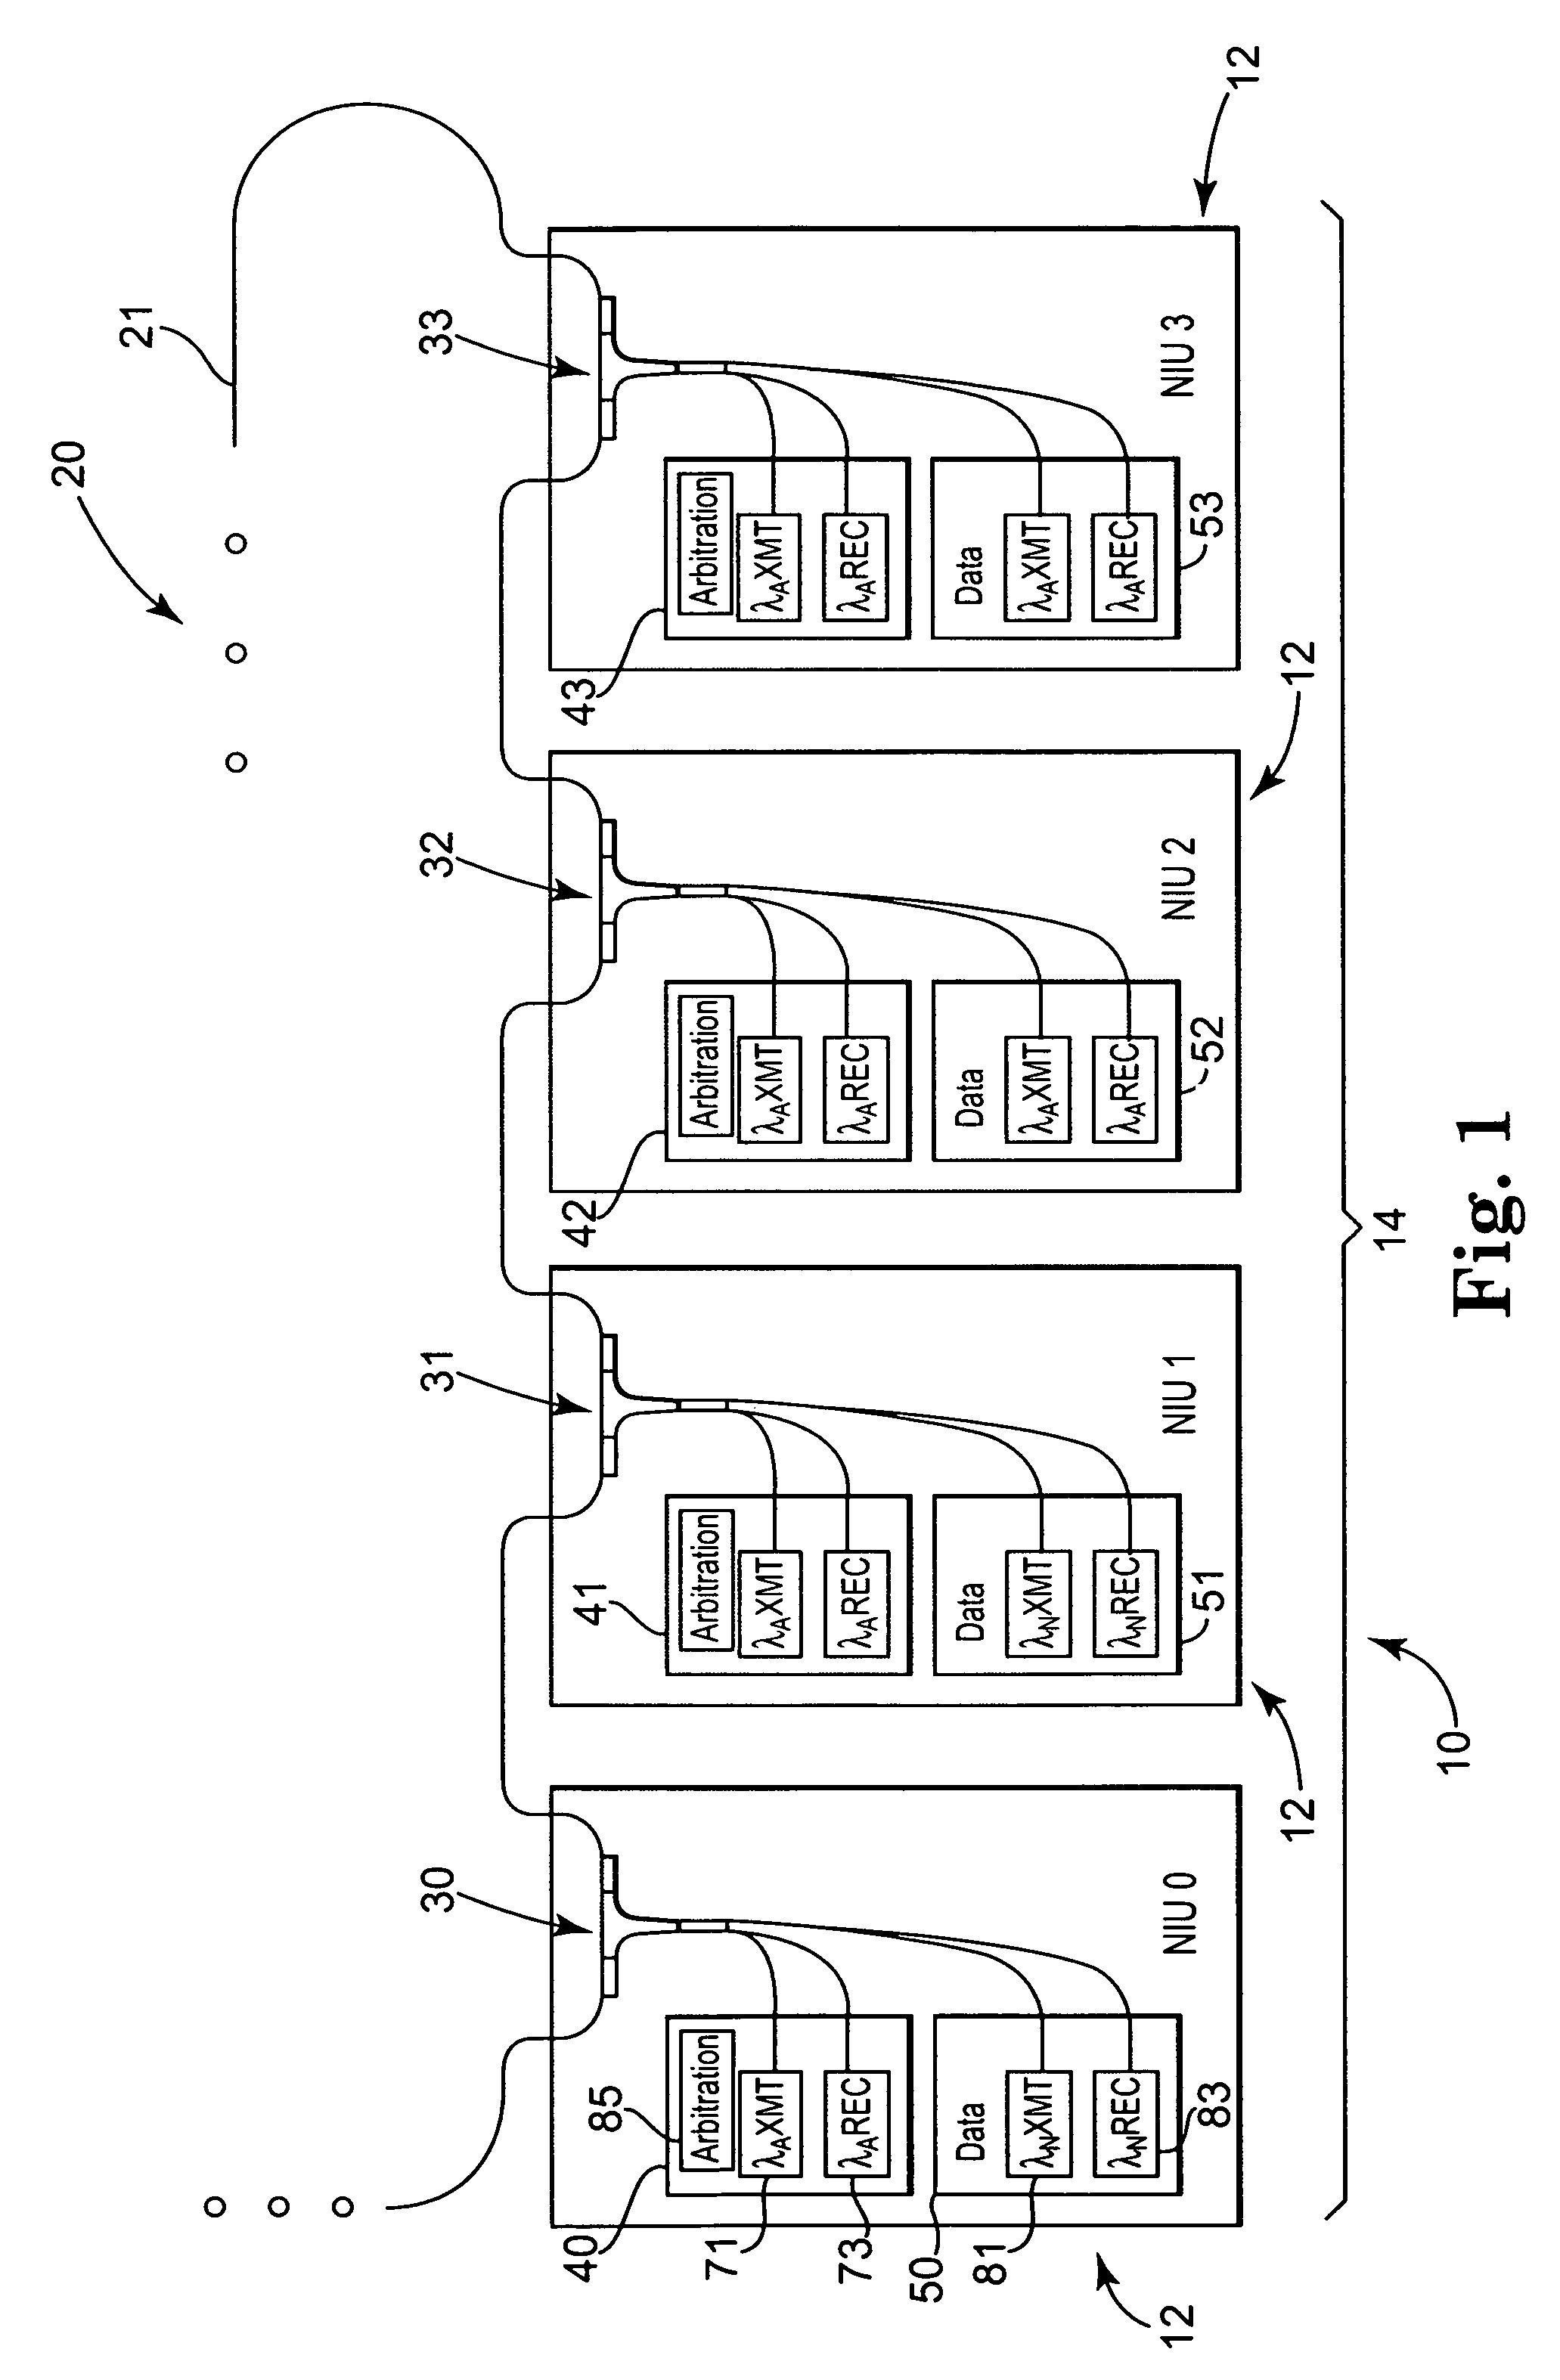 Wavelength division multiplexed optical channel switching